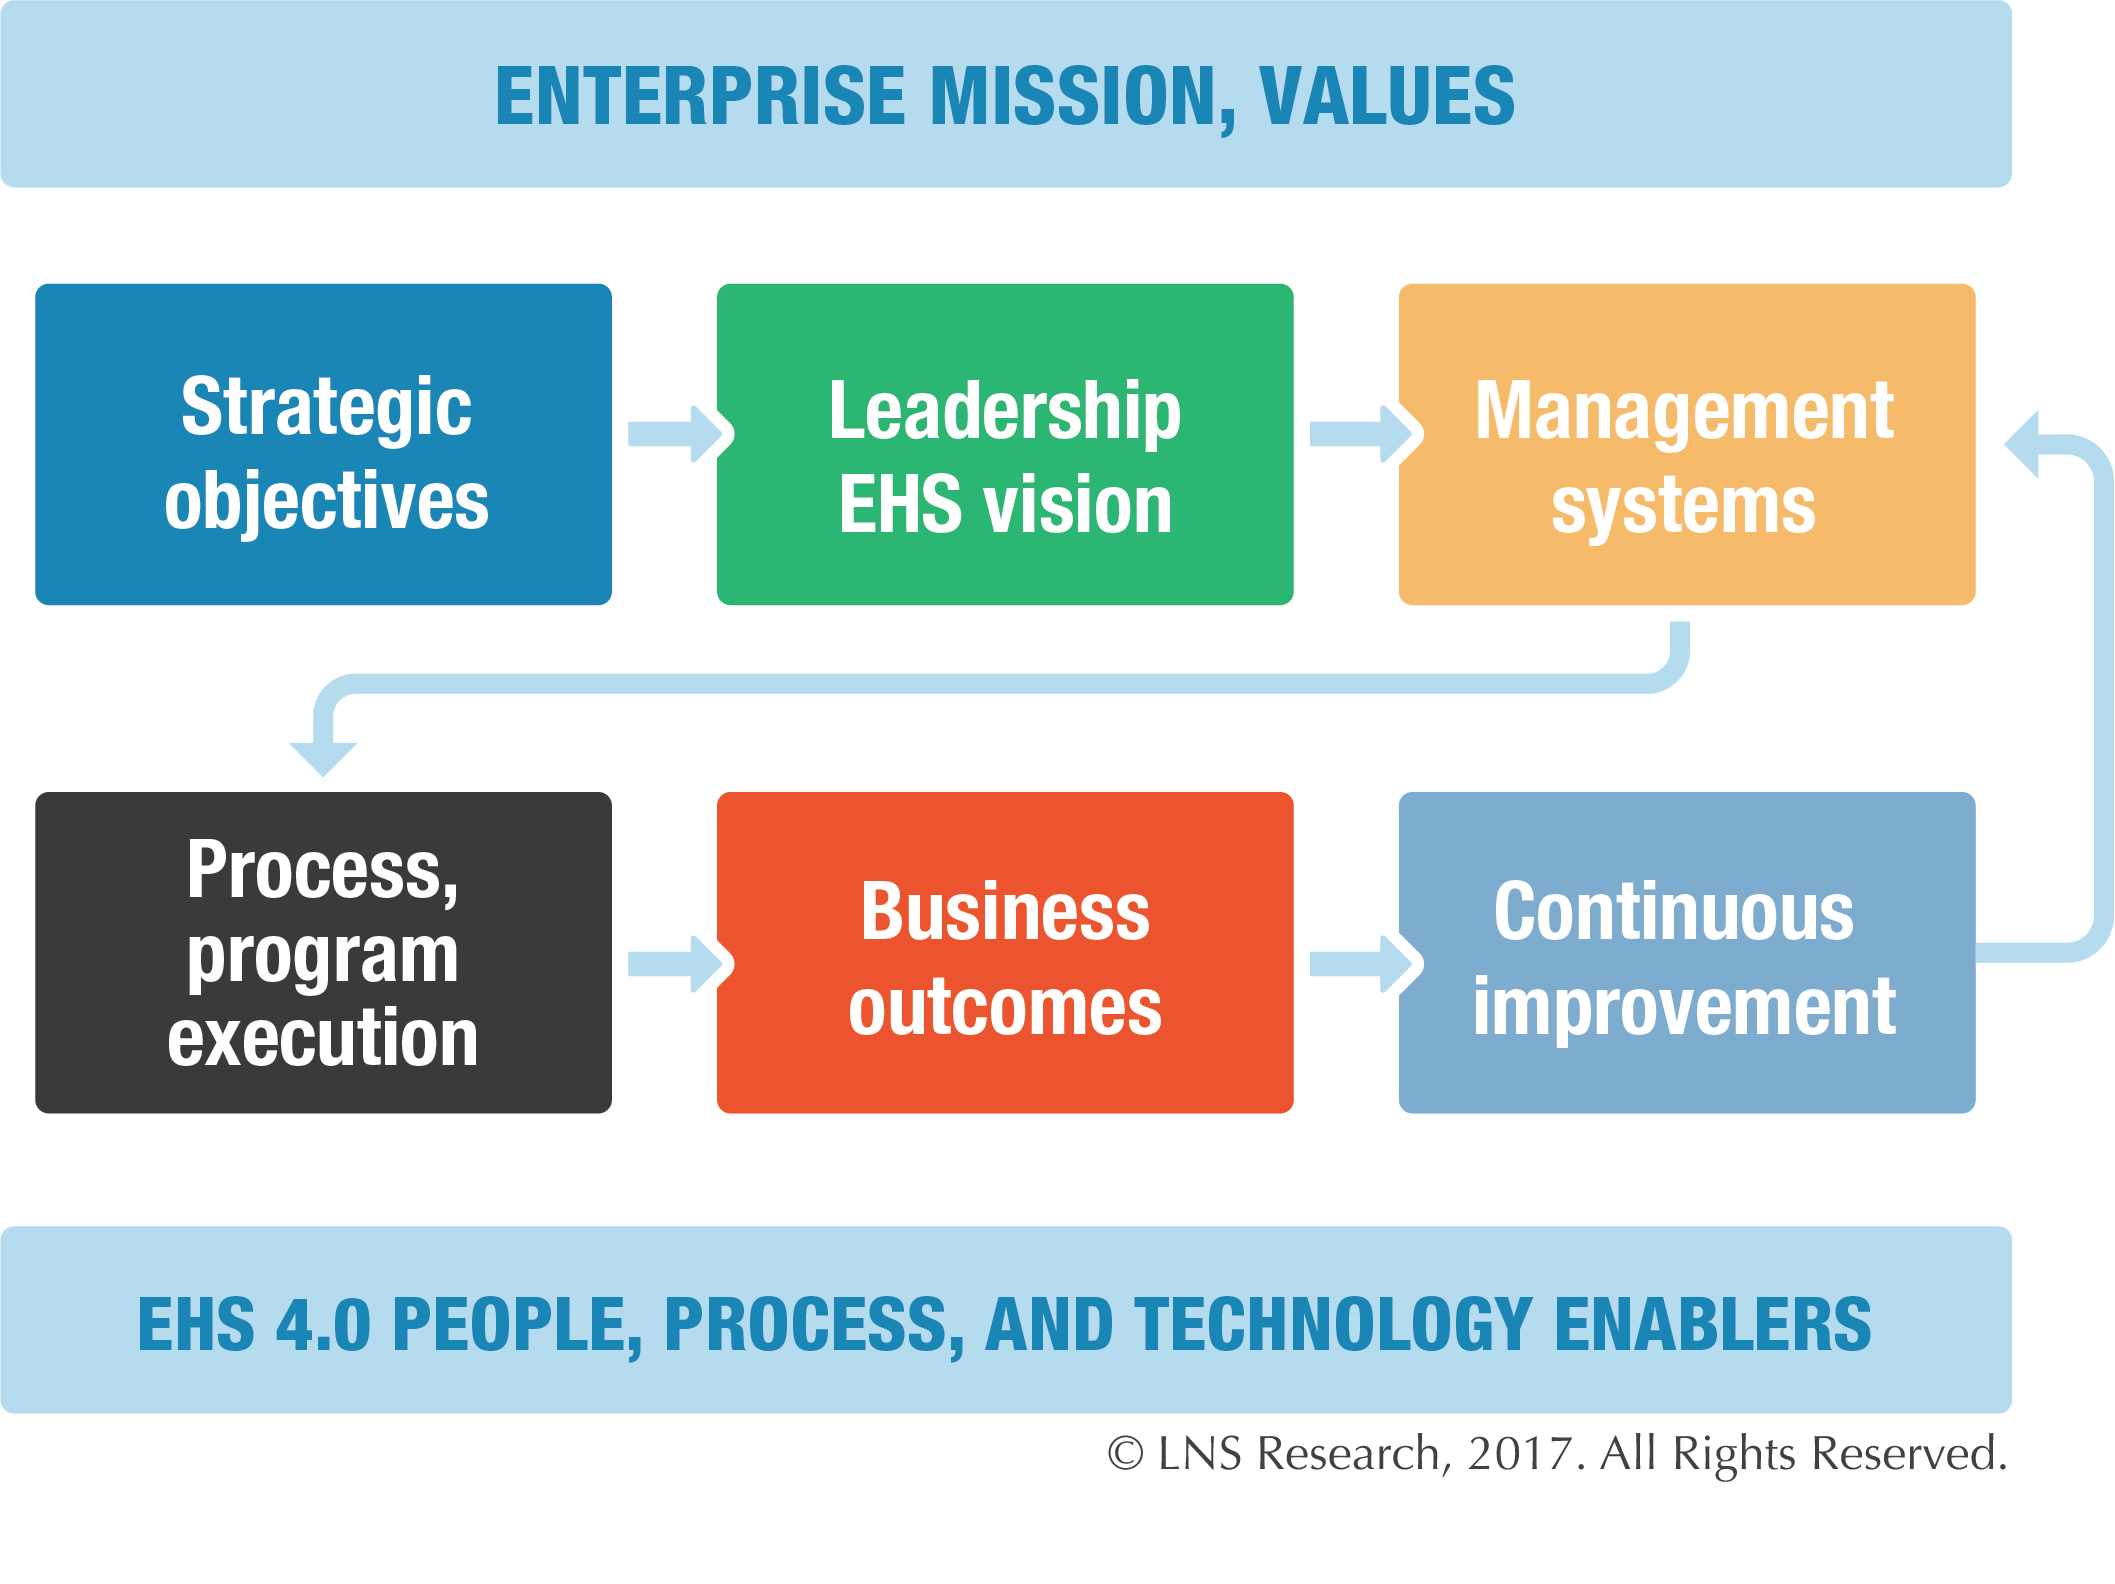 EHS 4.0 People, Process, and Technology Enablers